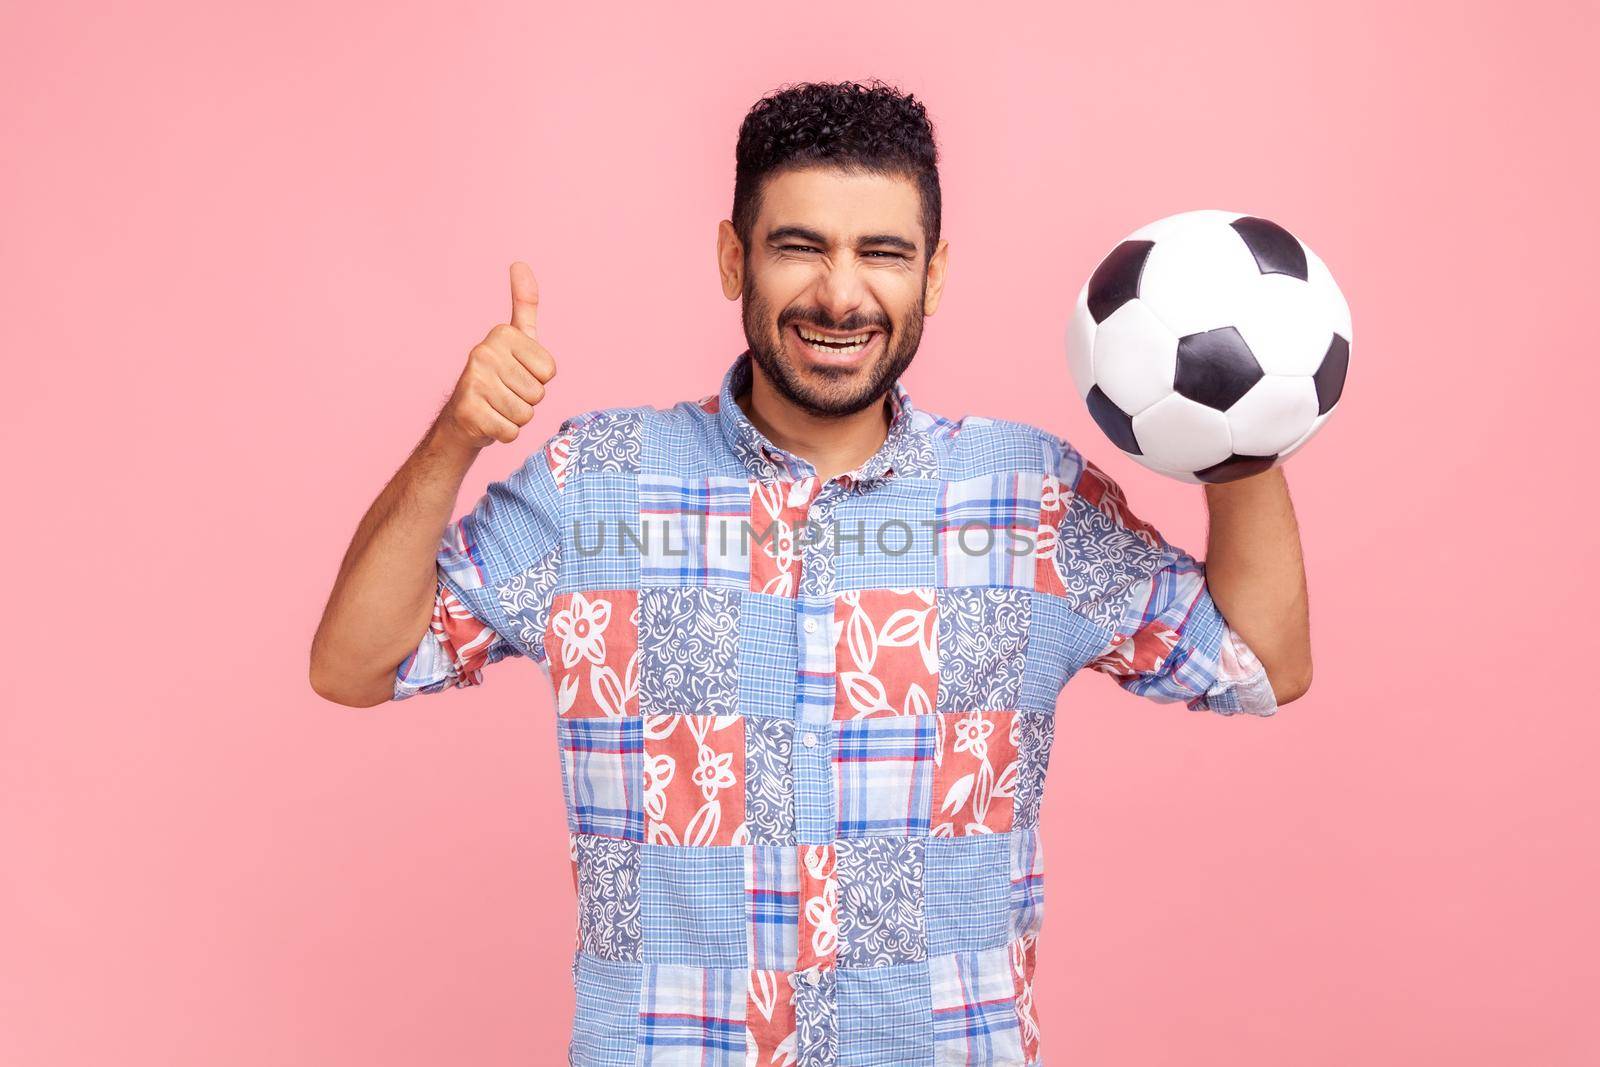 Happy excited bearded man with dark hair and beard wearing blue shirt posing with soccer ball and showing thumb up, cheering on football match. Indoor studio shot isolated on pink background.